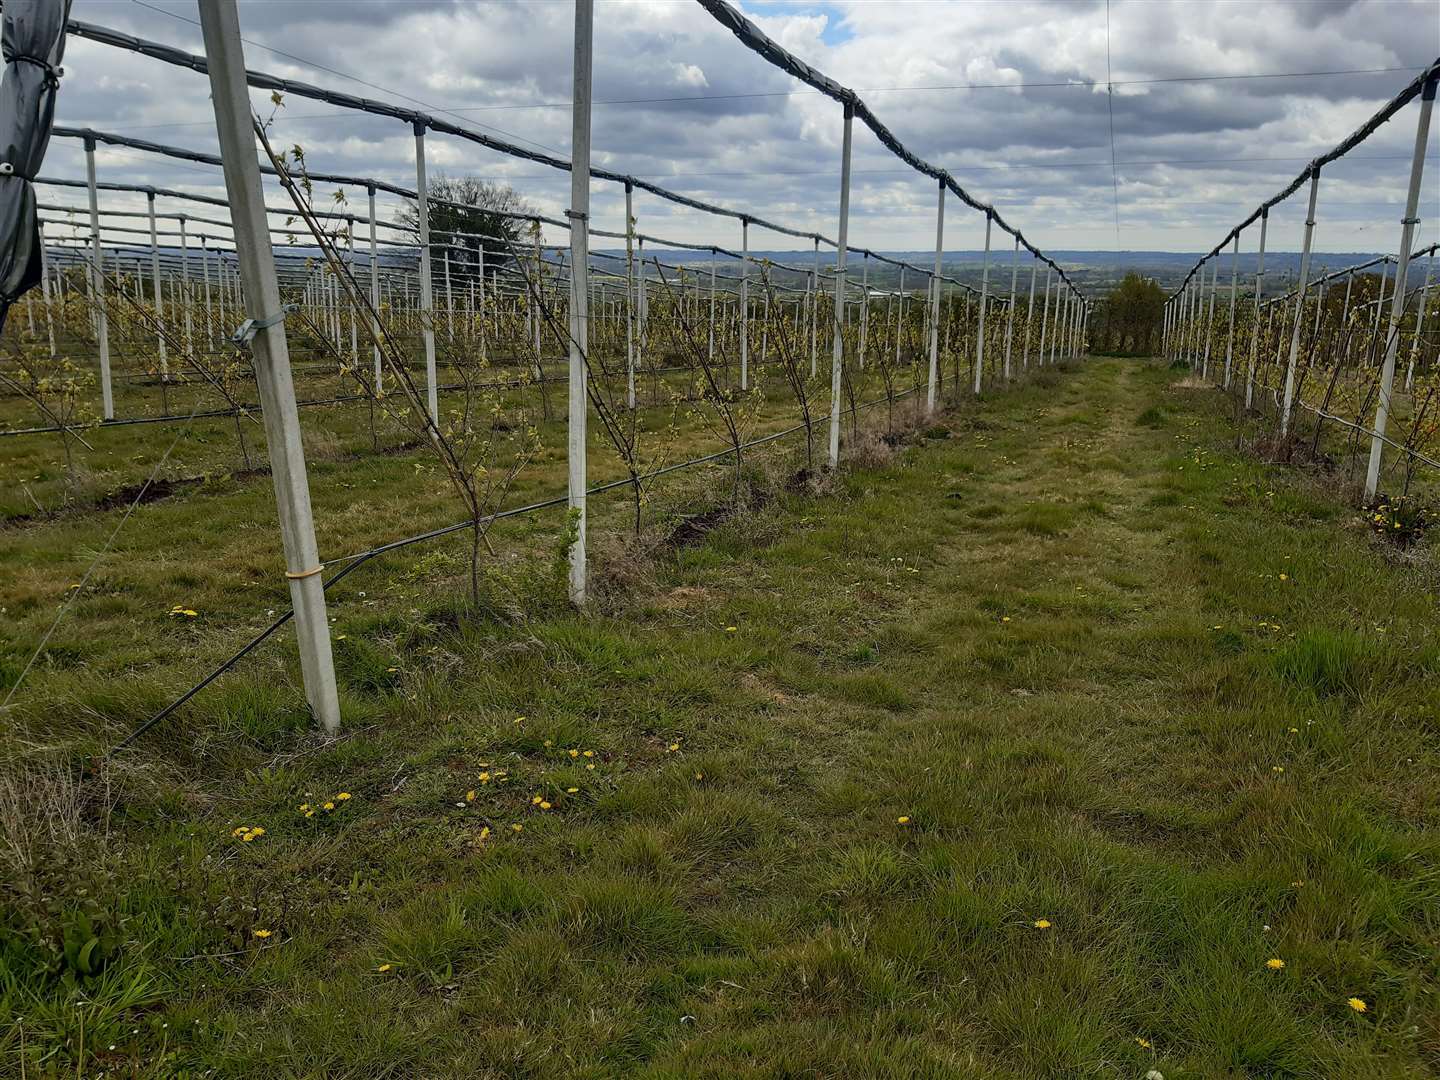 Pristine orchards are out in favour of regenerative farming methods